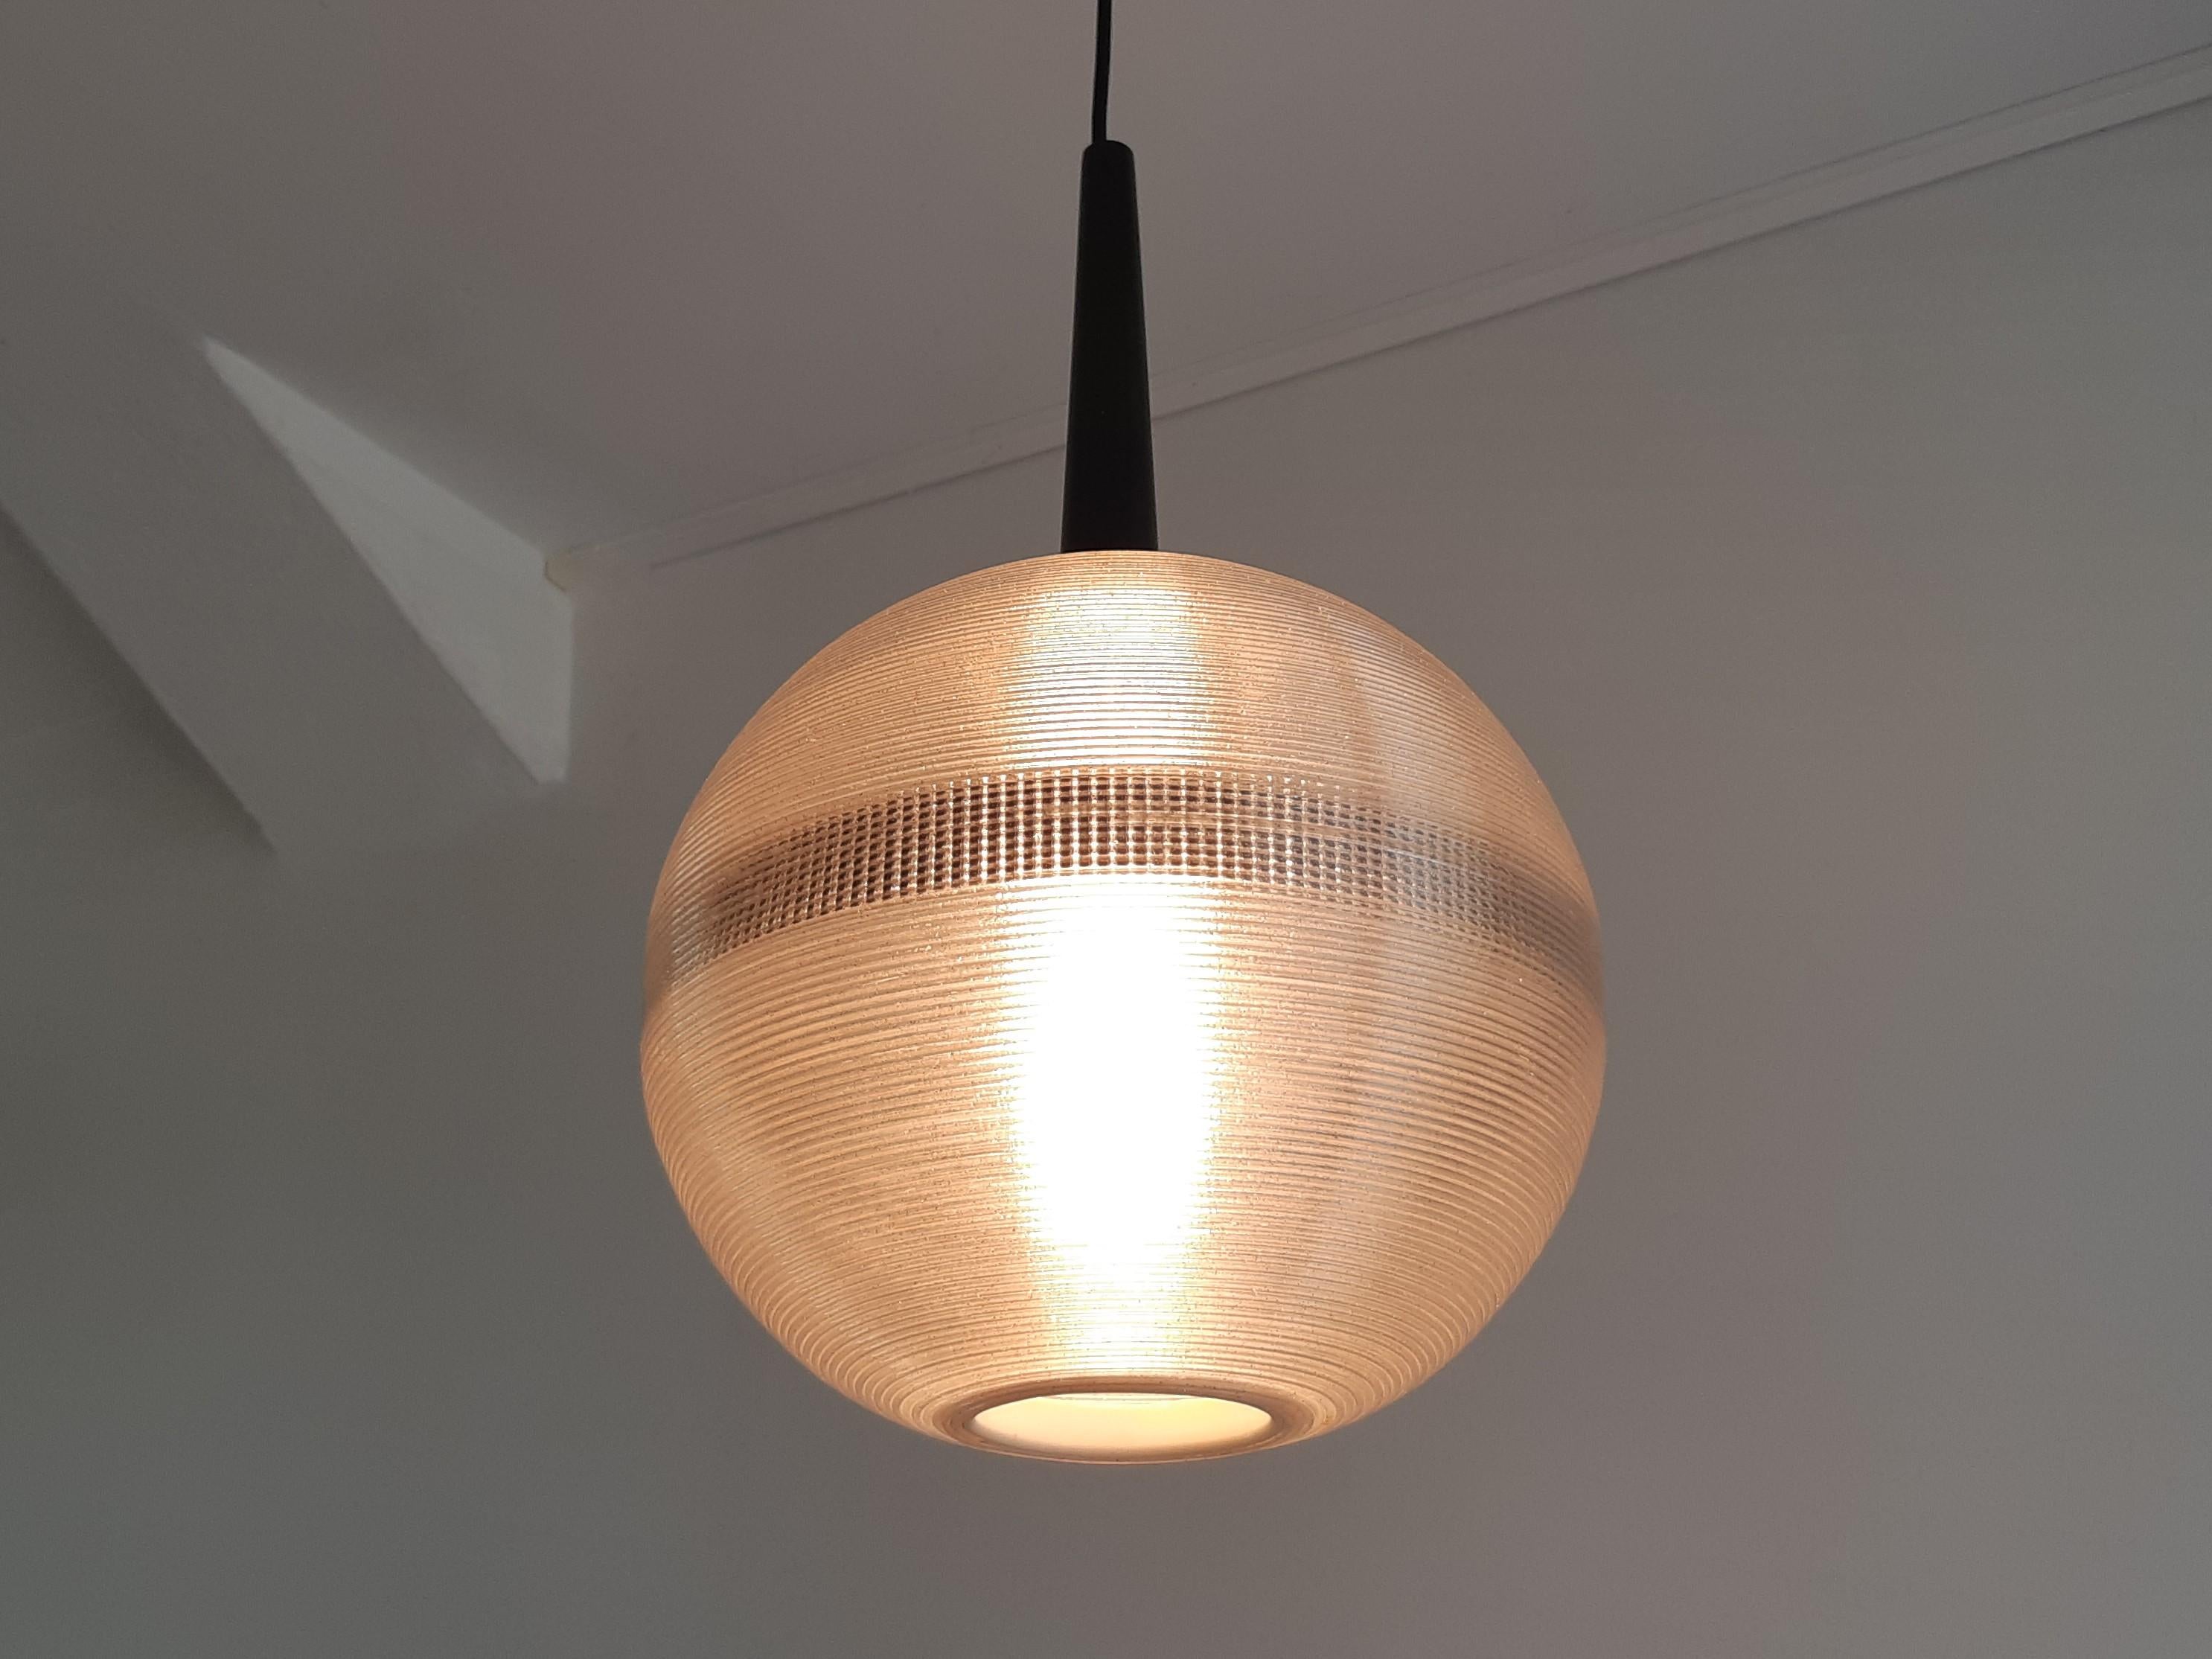 Mid-20th Century Rare Pendant Lamp by John Reed for Rotaflex, UK, 1950's/1960's